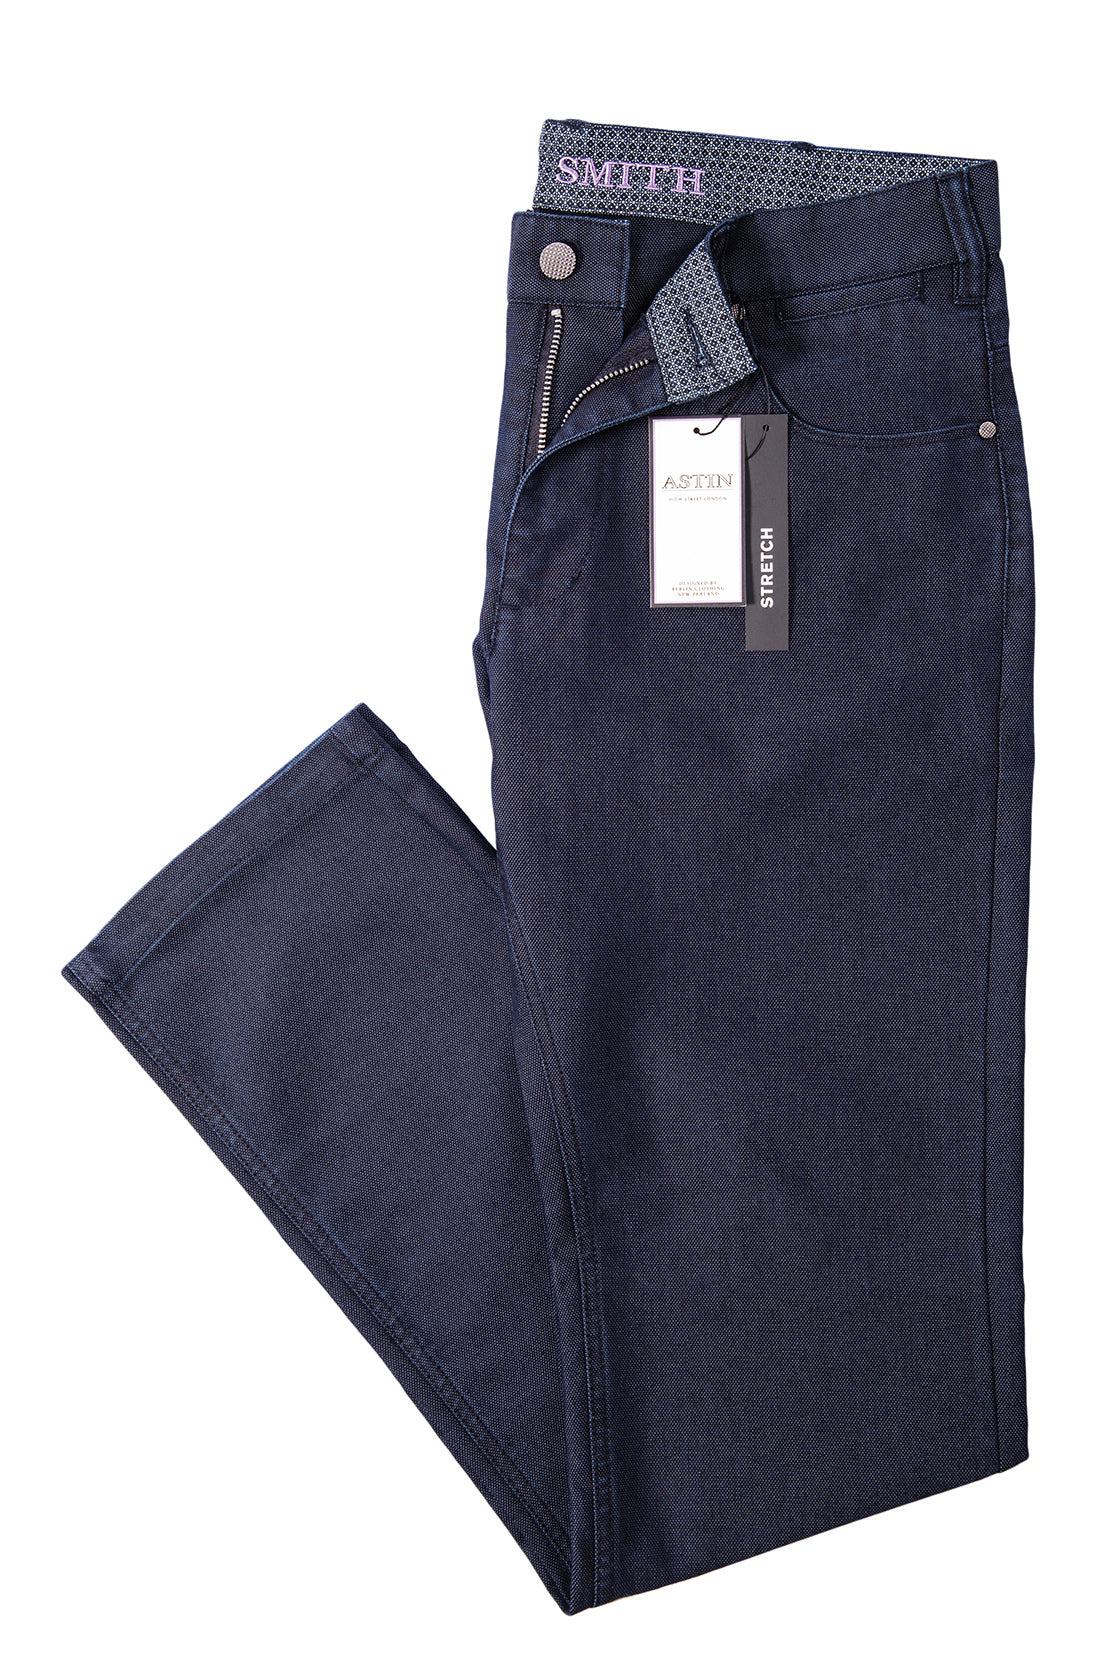 Astin Smith Oxford Casual 5 Pkt Pants